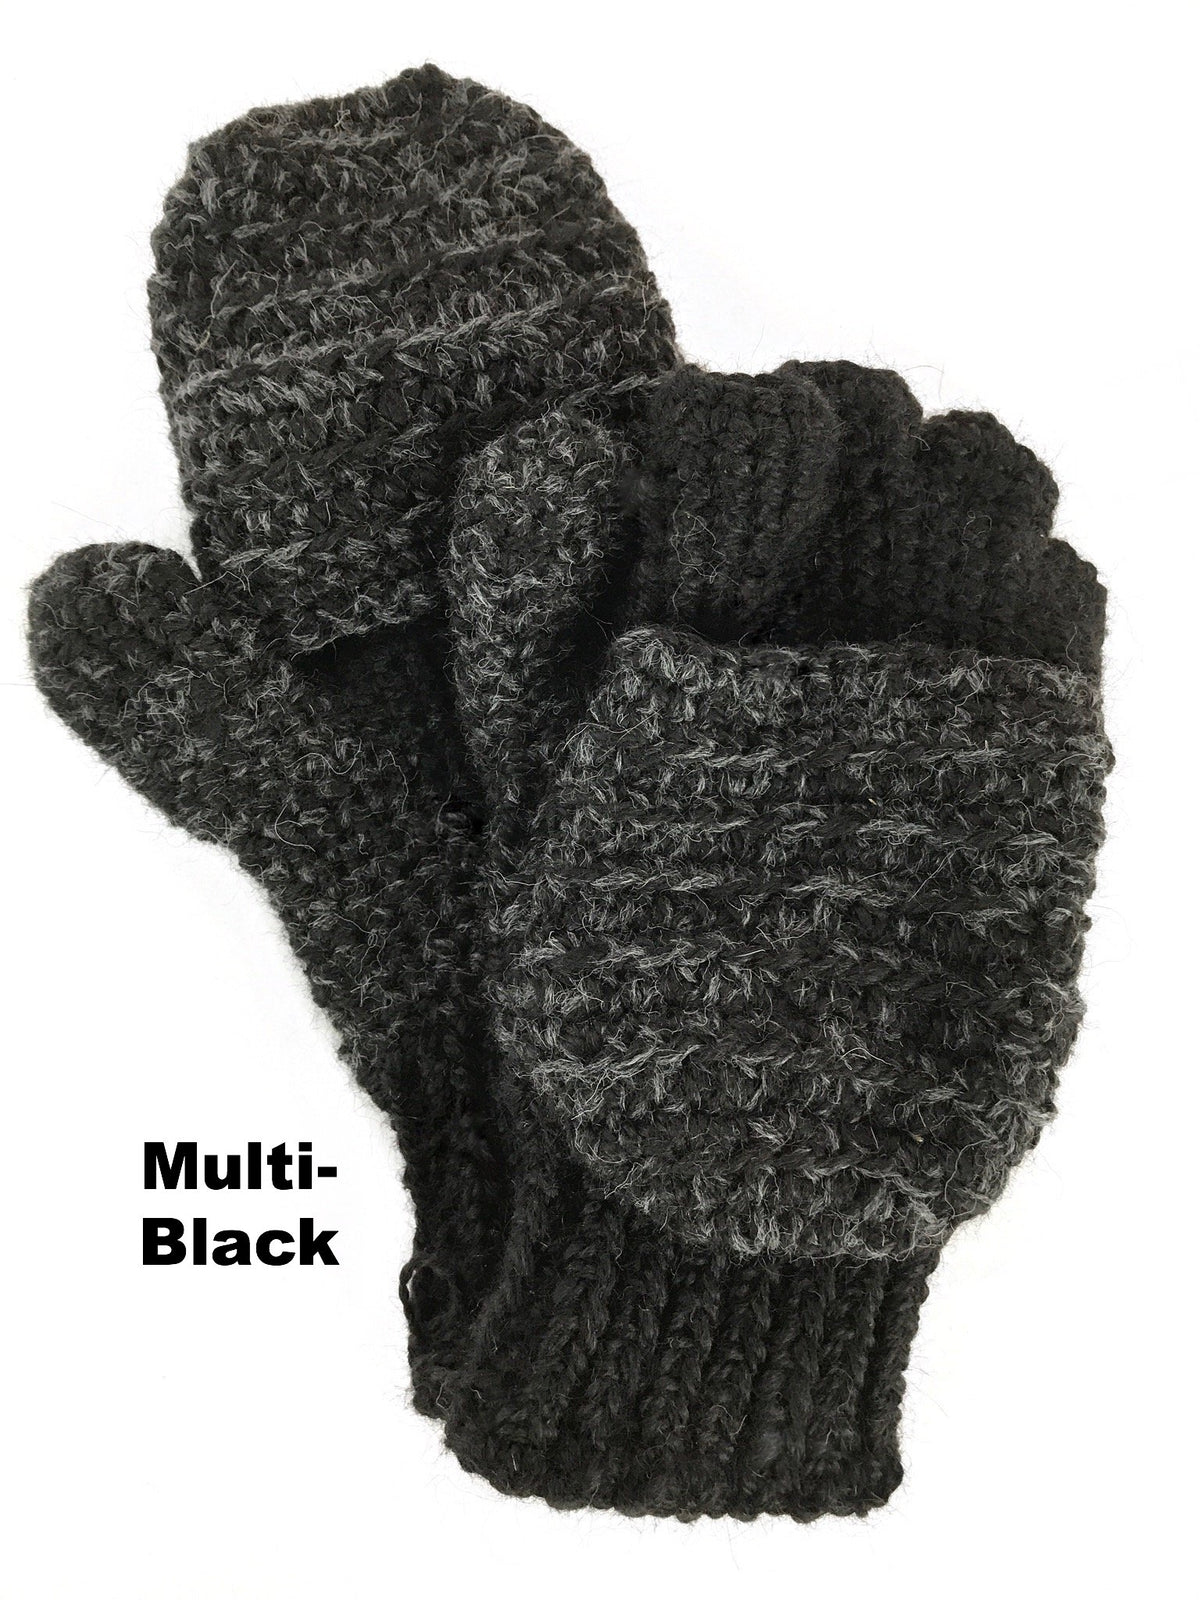 mittens that turn into gloves